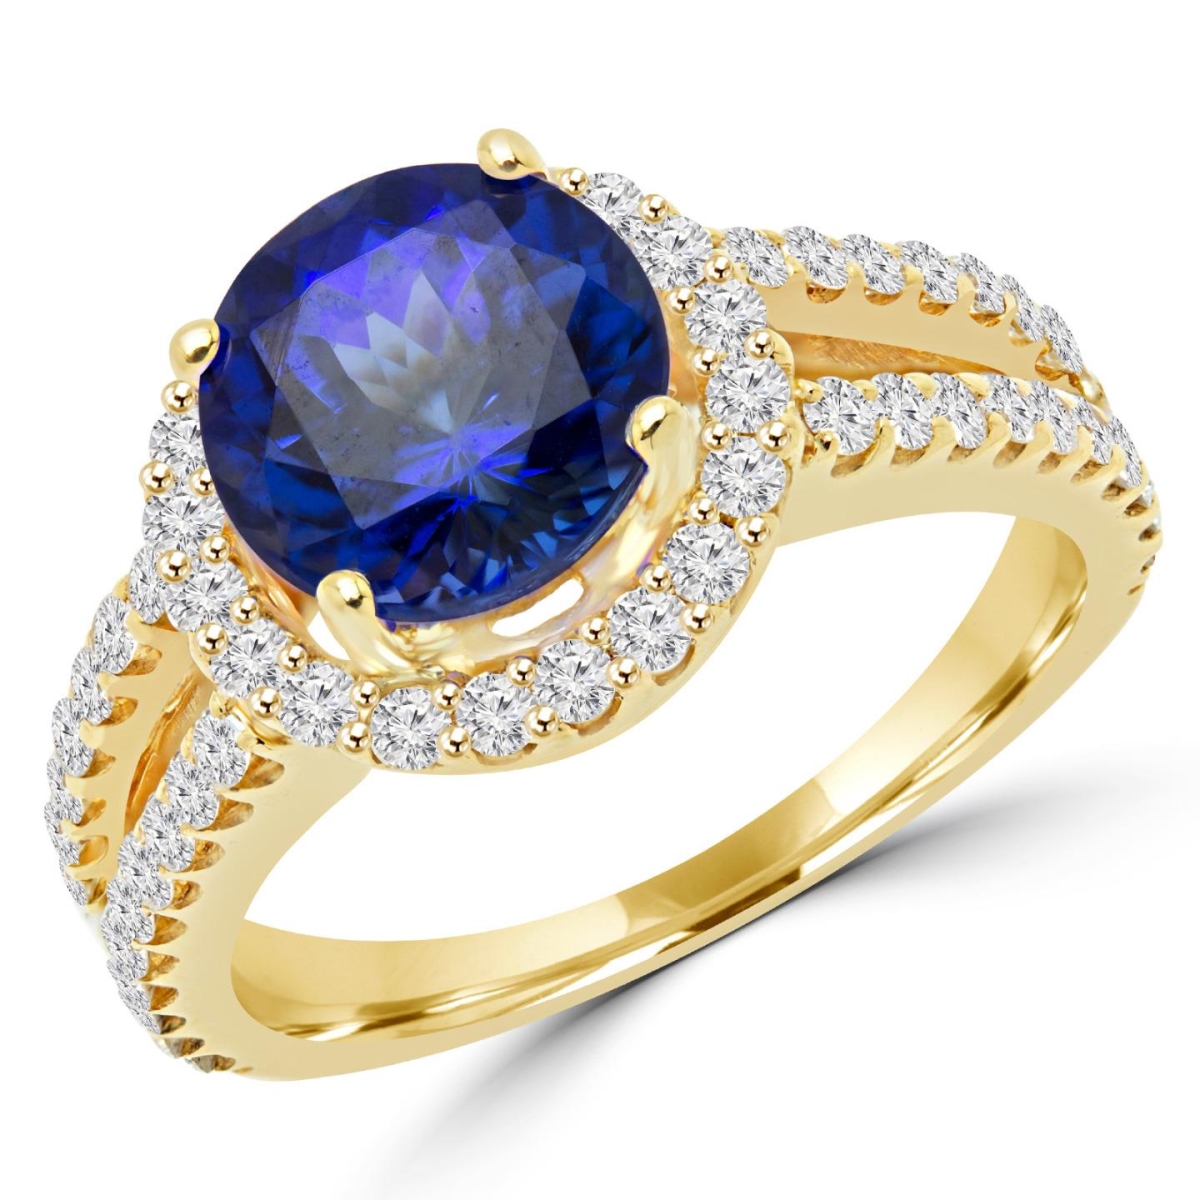 Md150166-3 3.1 Ctw Round Tanzanite & Diamond Halo Cocktail Ring In 18k Yellow Gold, Size 3